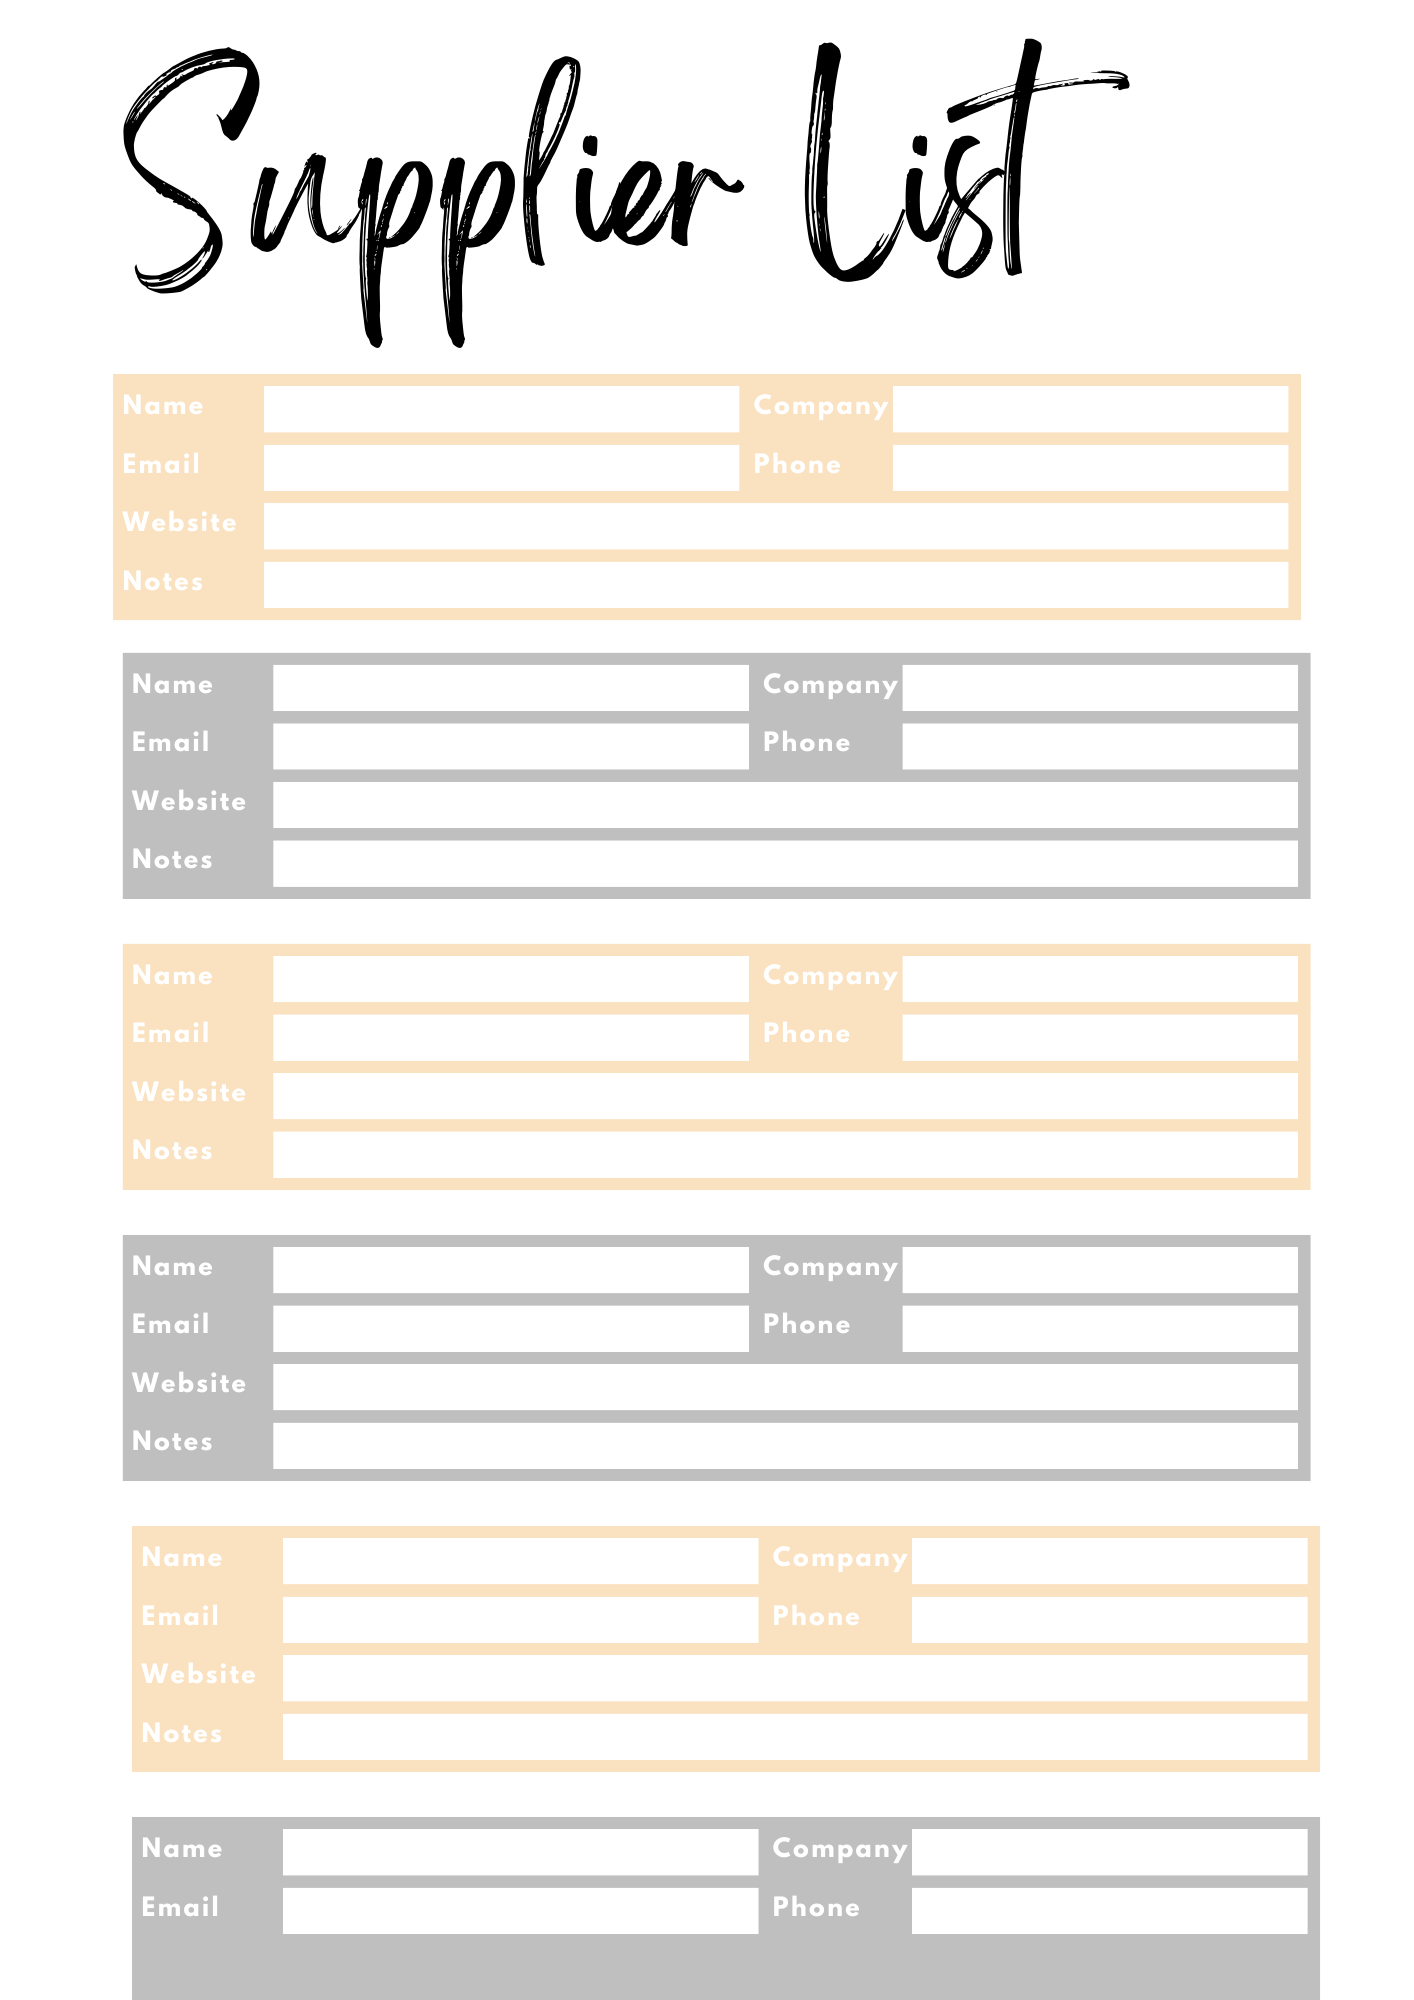 Free Product Planner